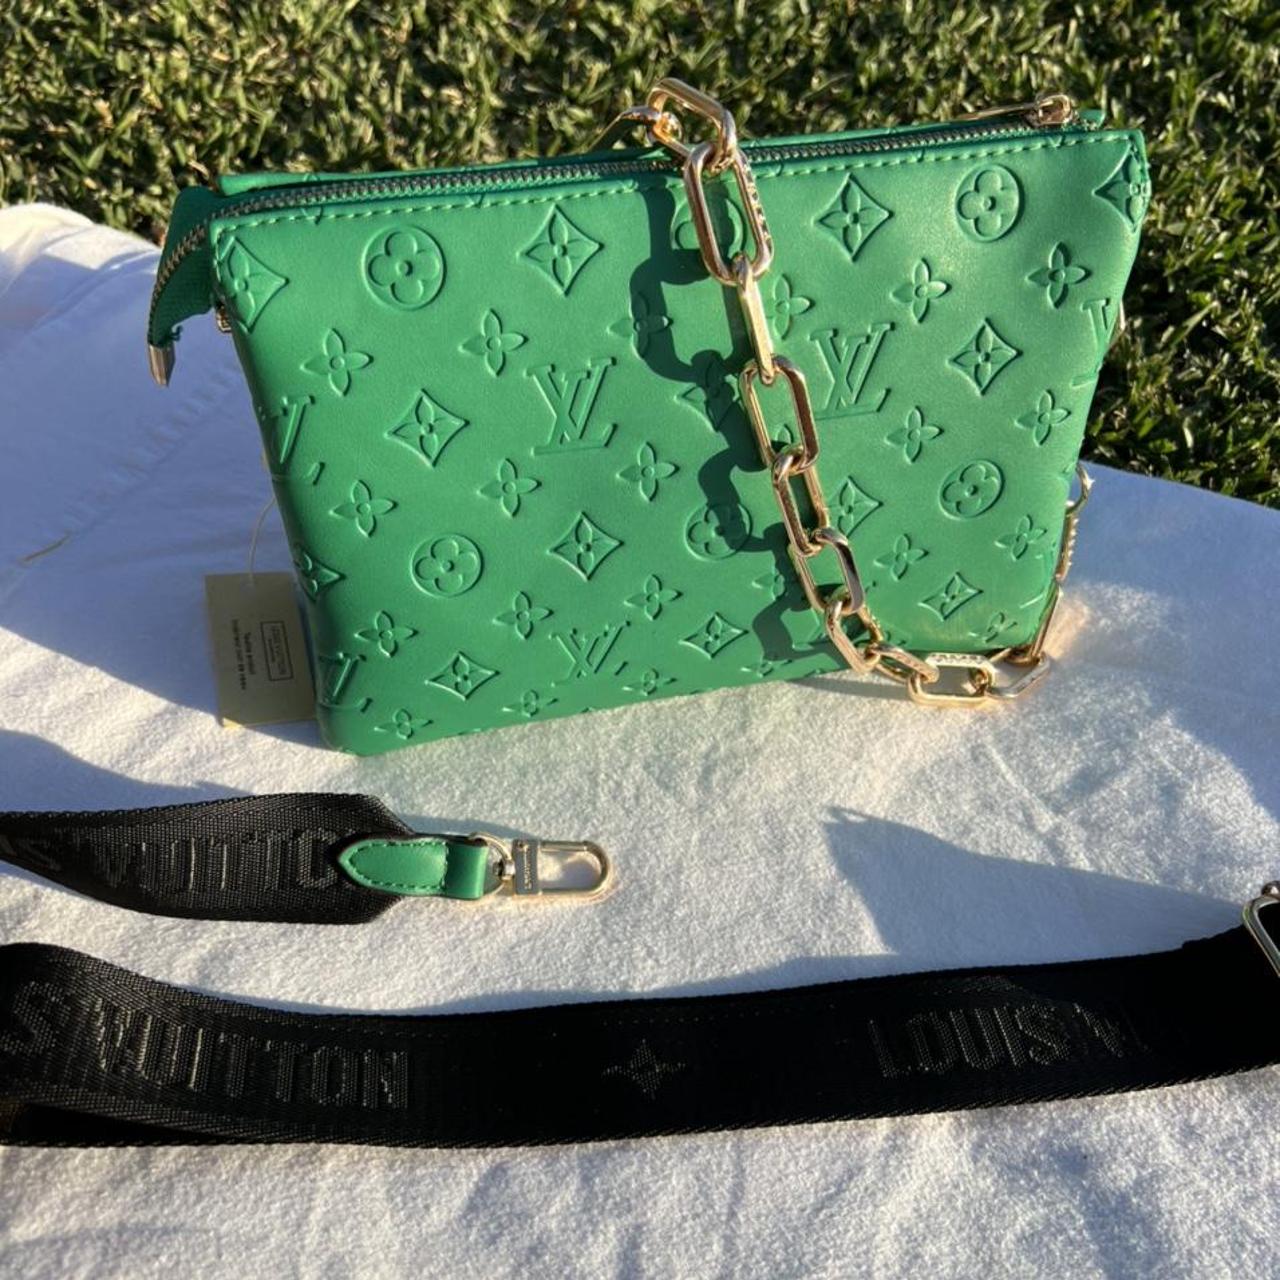 Brand new green Louis Vuitton coussin bag perfect